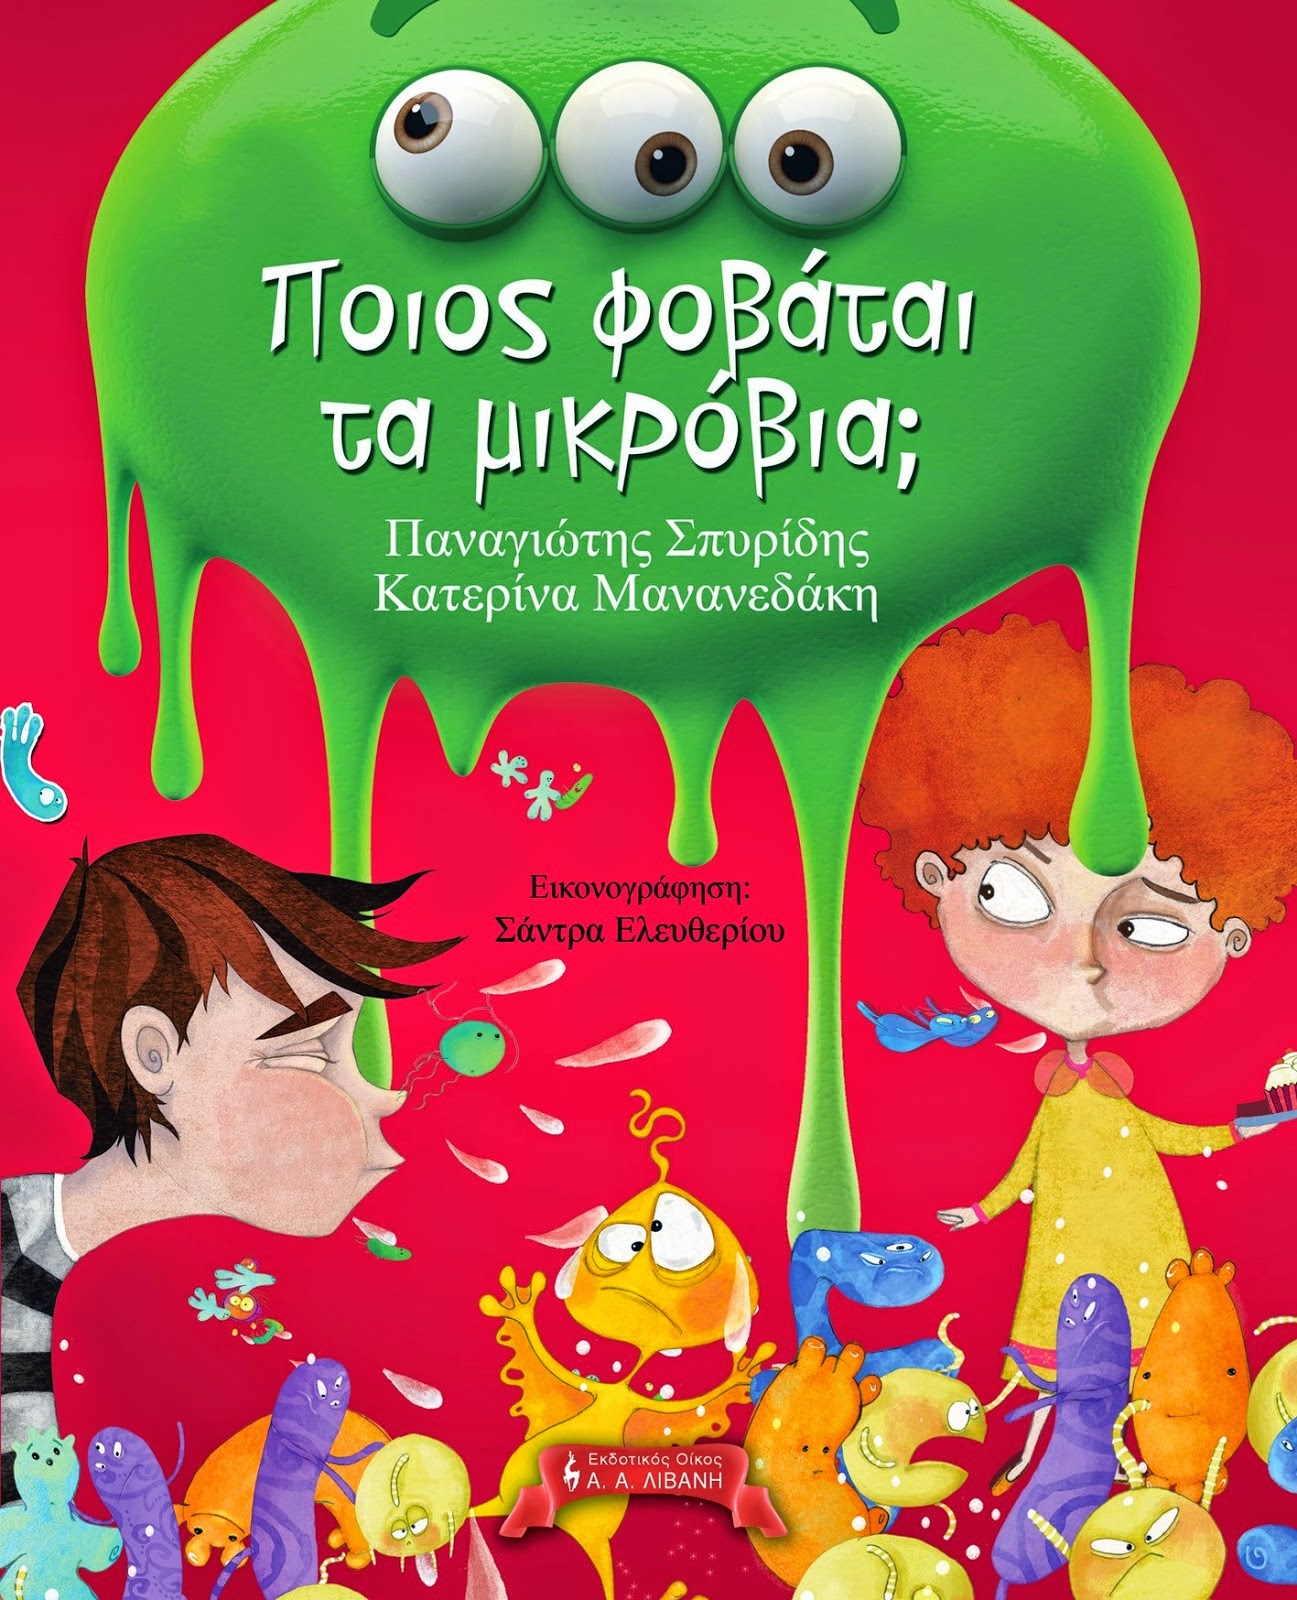 http://www.culture21century.gr/2014/12/book-review_31.html